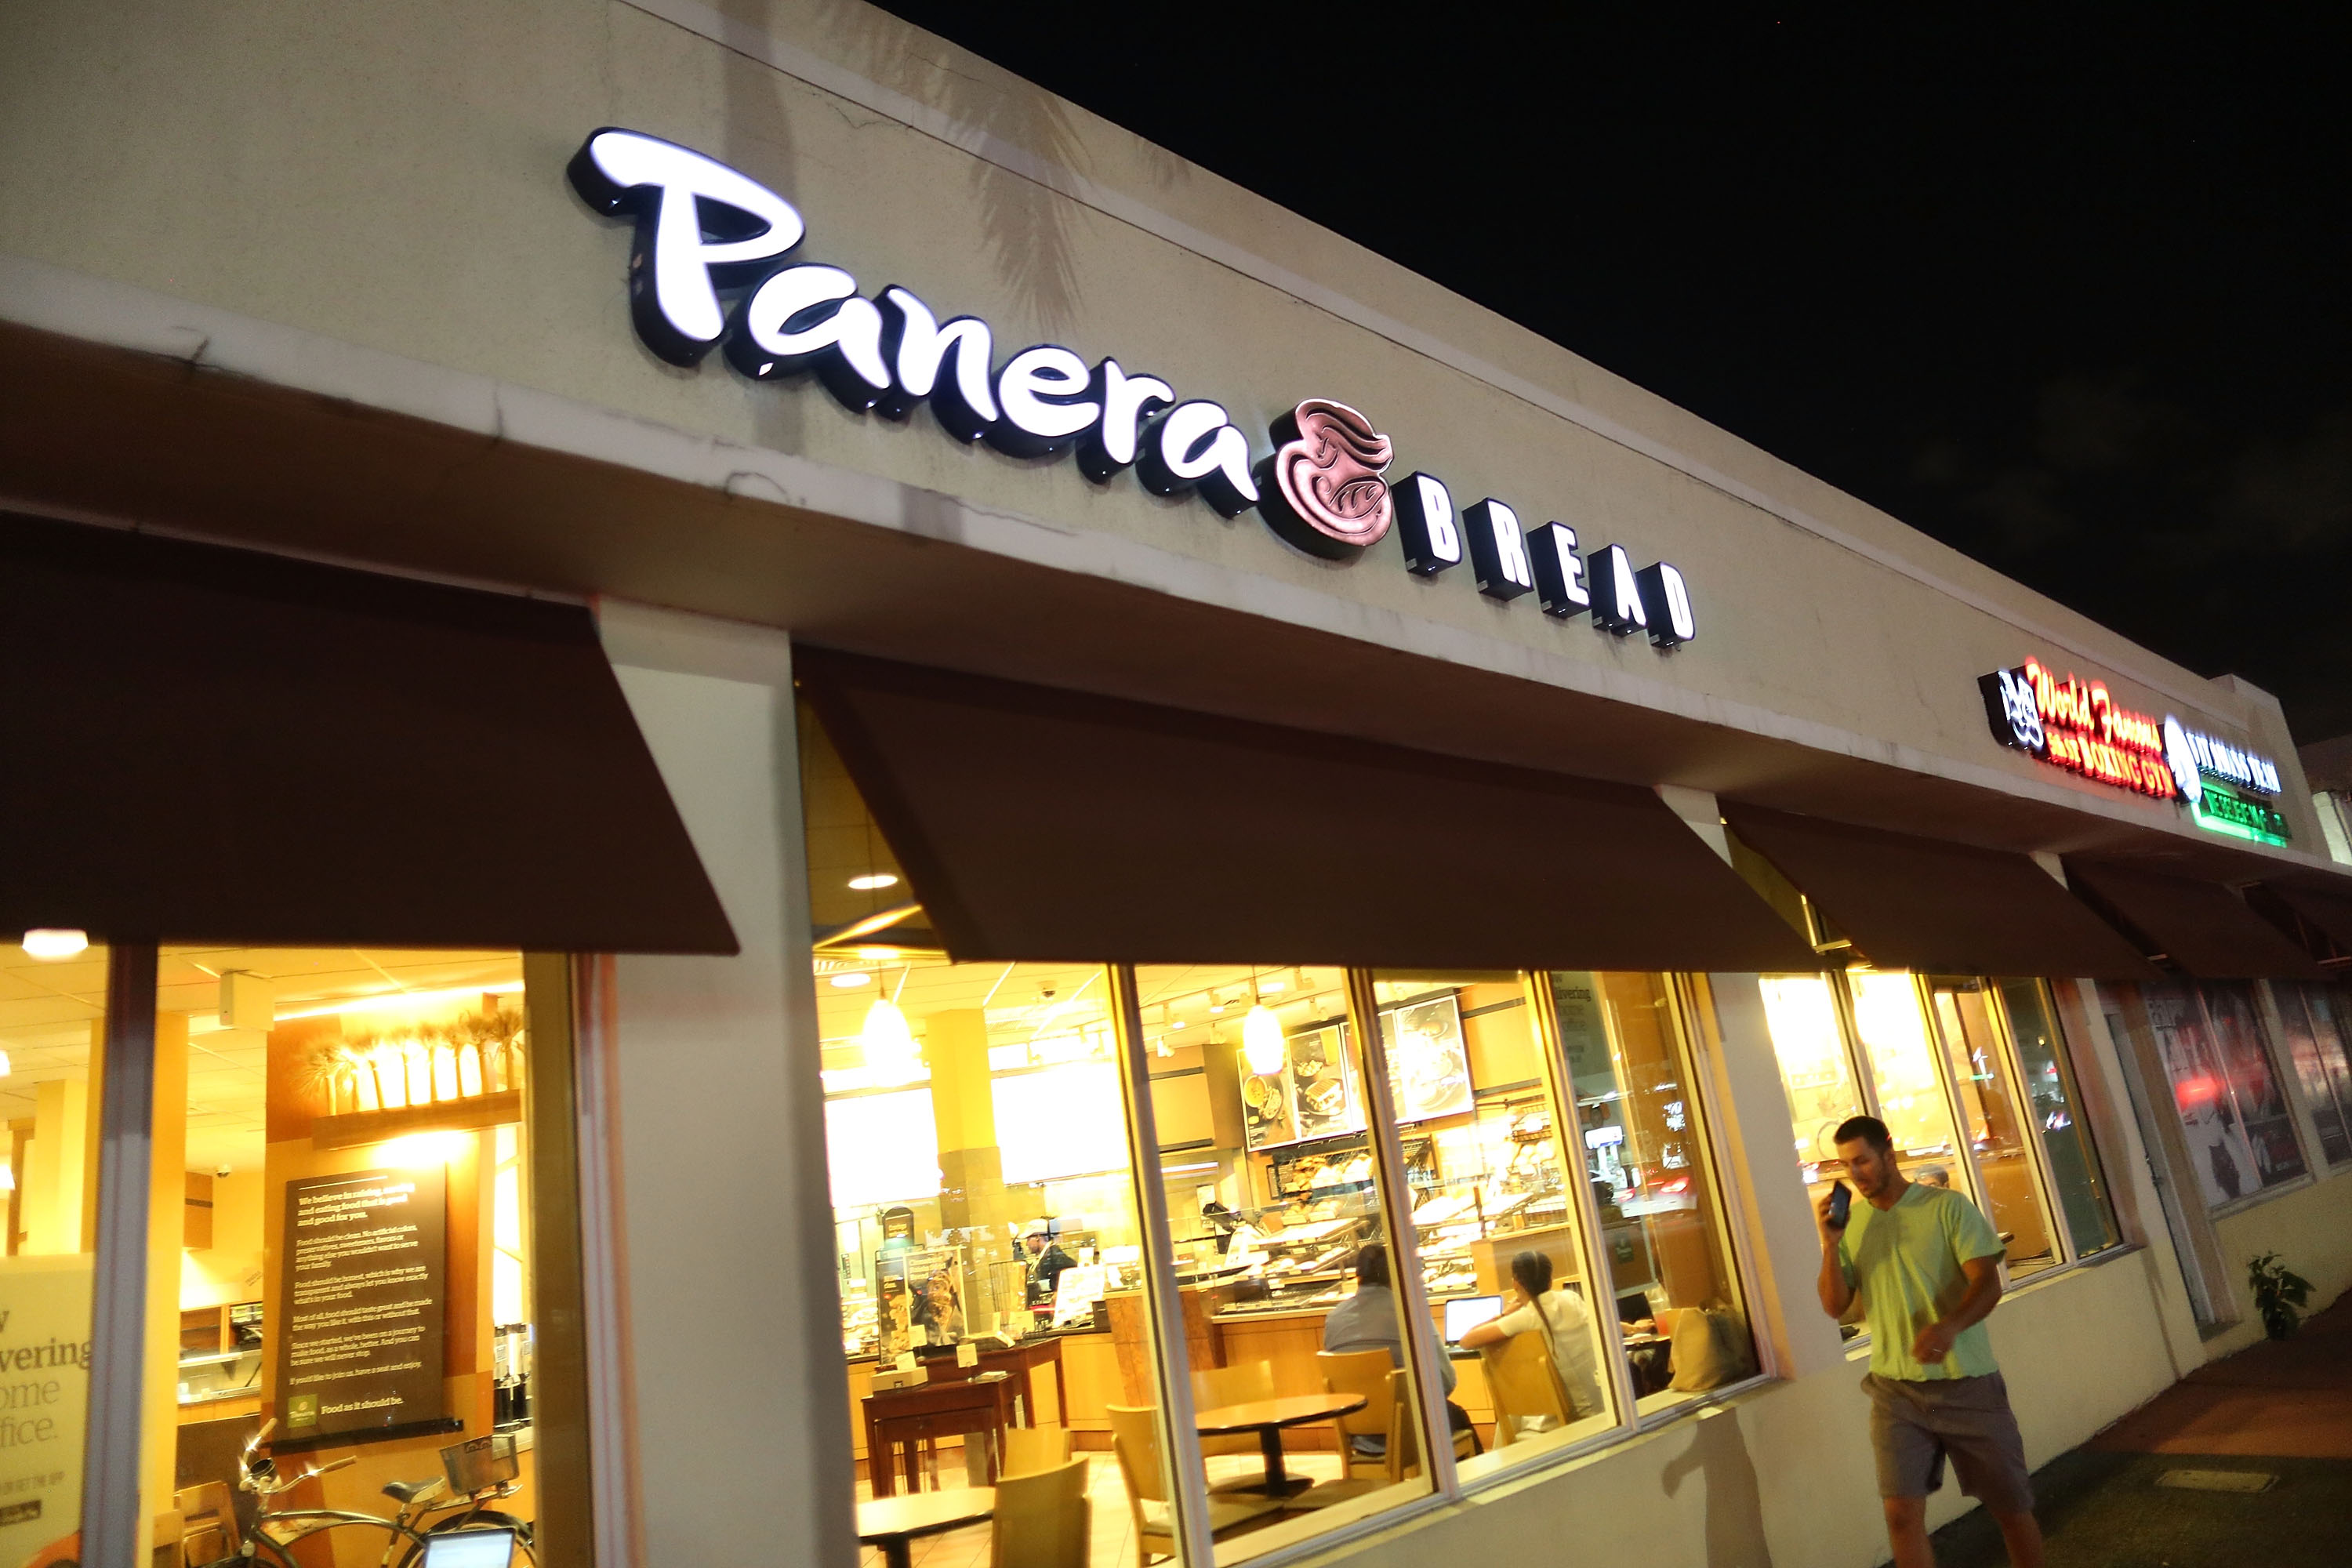 A Panera Bread restaurant is seen on the day it is announced that the Panera Bread company is acquiring sandwich rival Au Bon Pain on November 8, 2017 in Miami Beach, Florida.